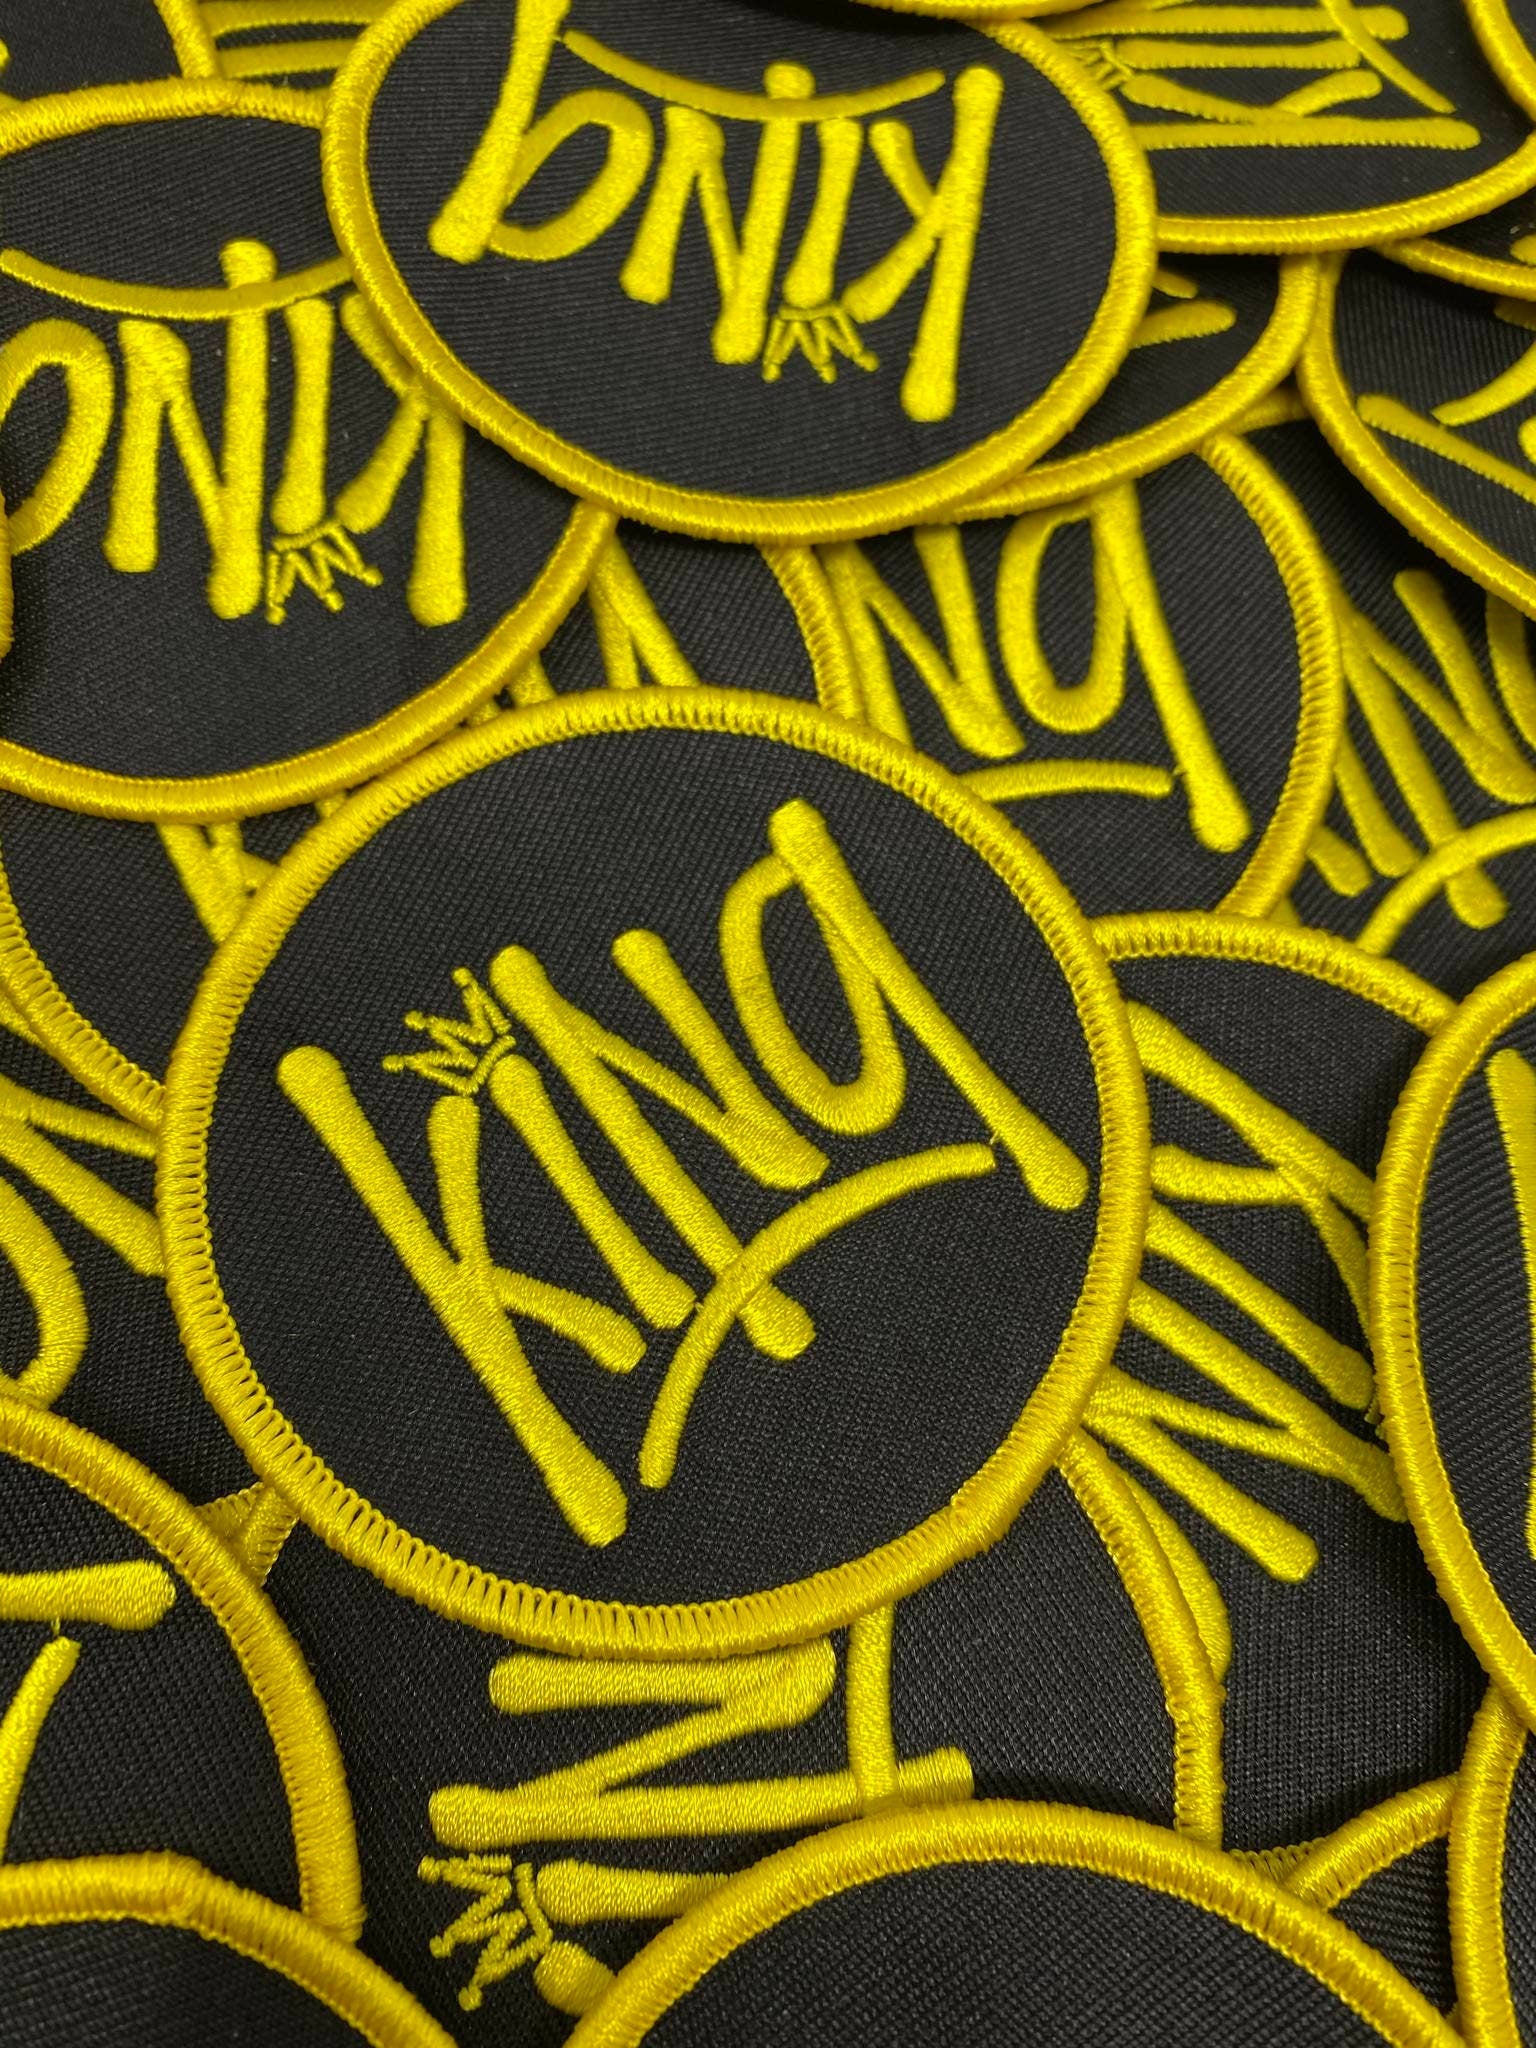 Rhino the King Embroidered Iron-on / Velcro Sleeve Patch